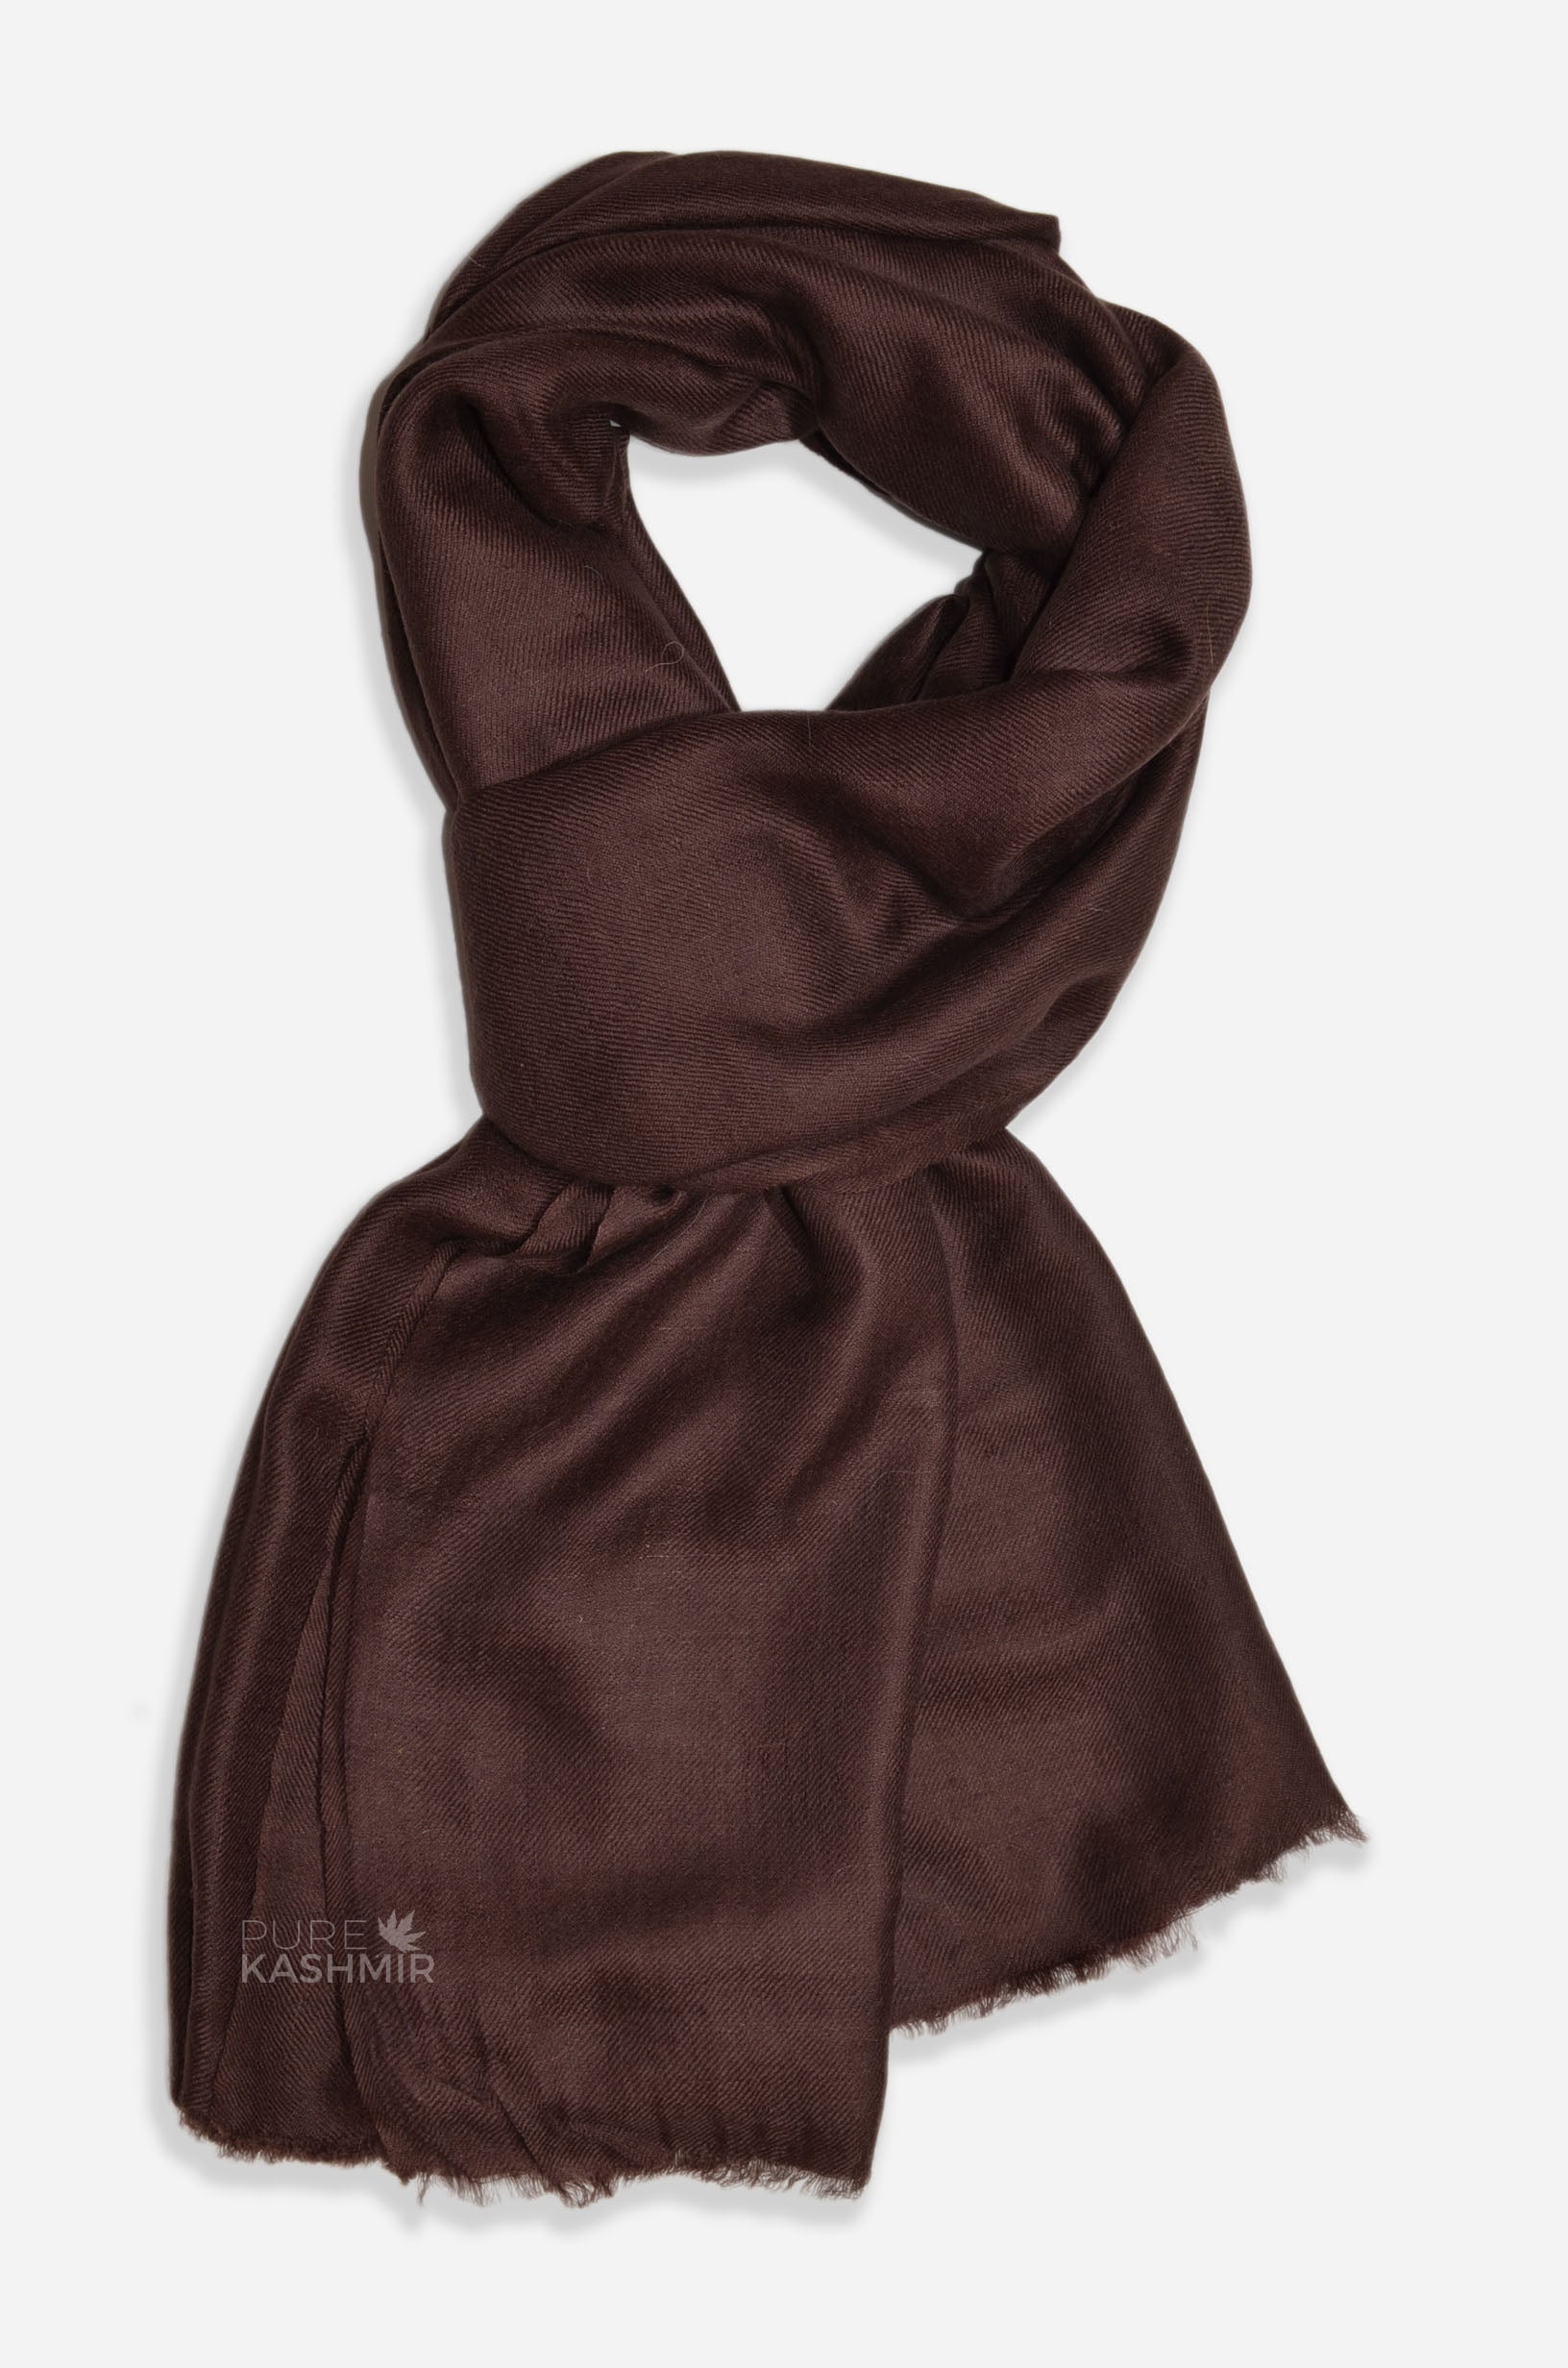 Brown Cashmere Scarf/Shawl Stole: 70 x 200 Cms